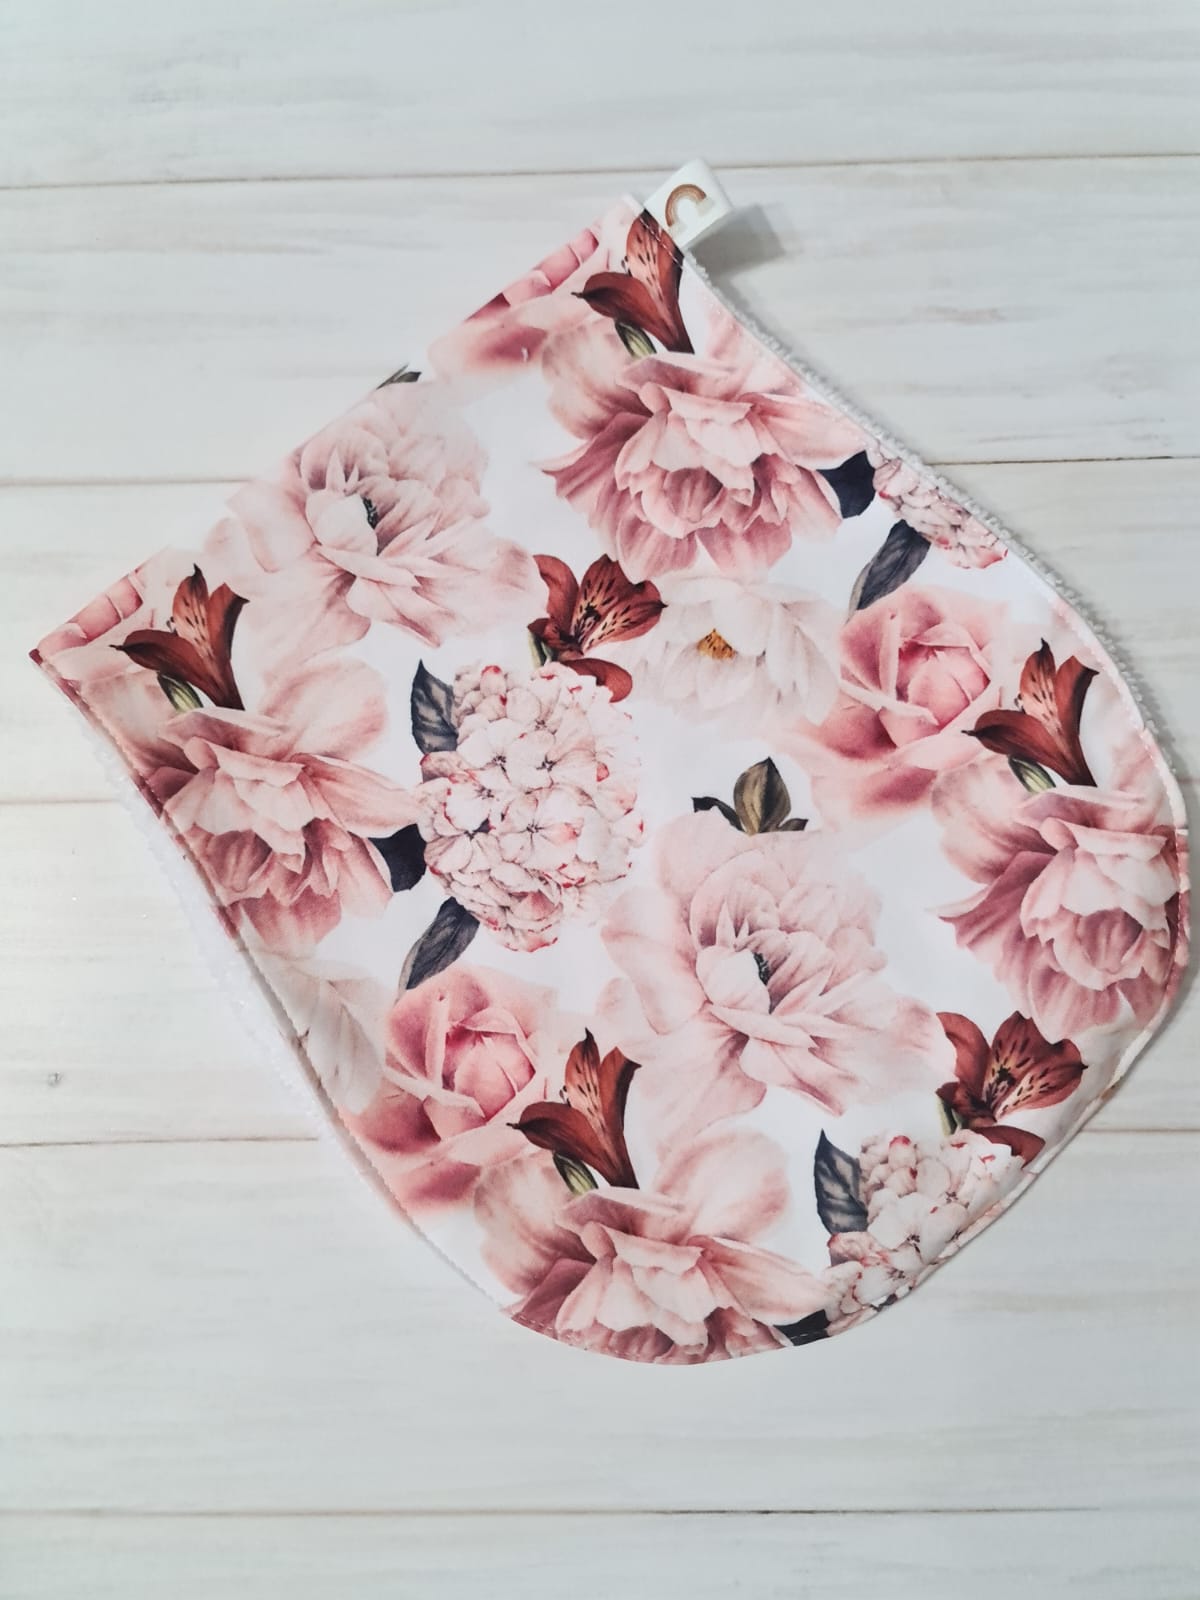 Burp Cloth- Pink and White Peonies (with absorbent toweling)